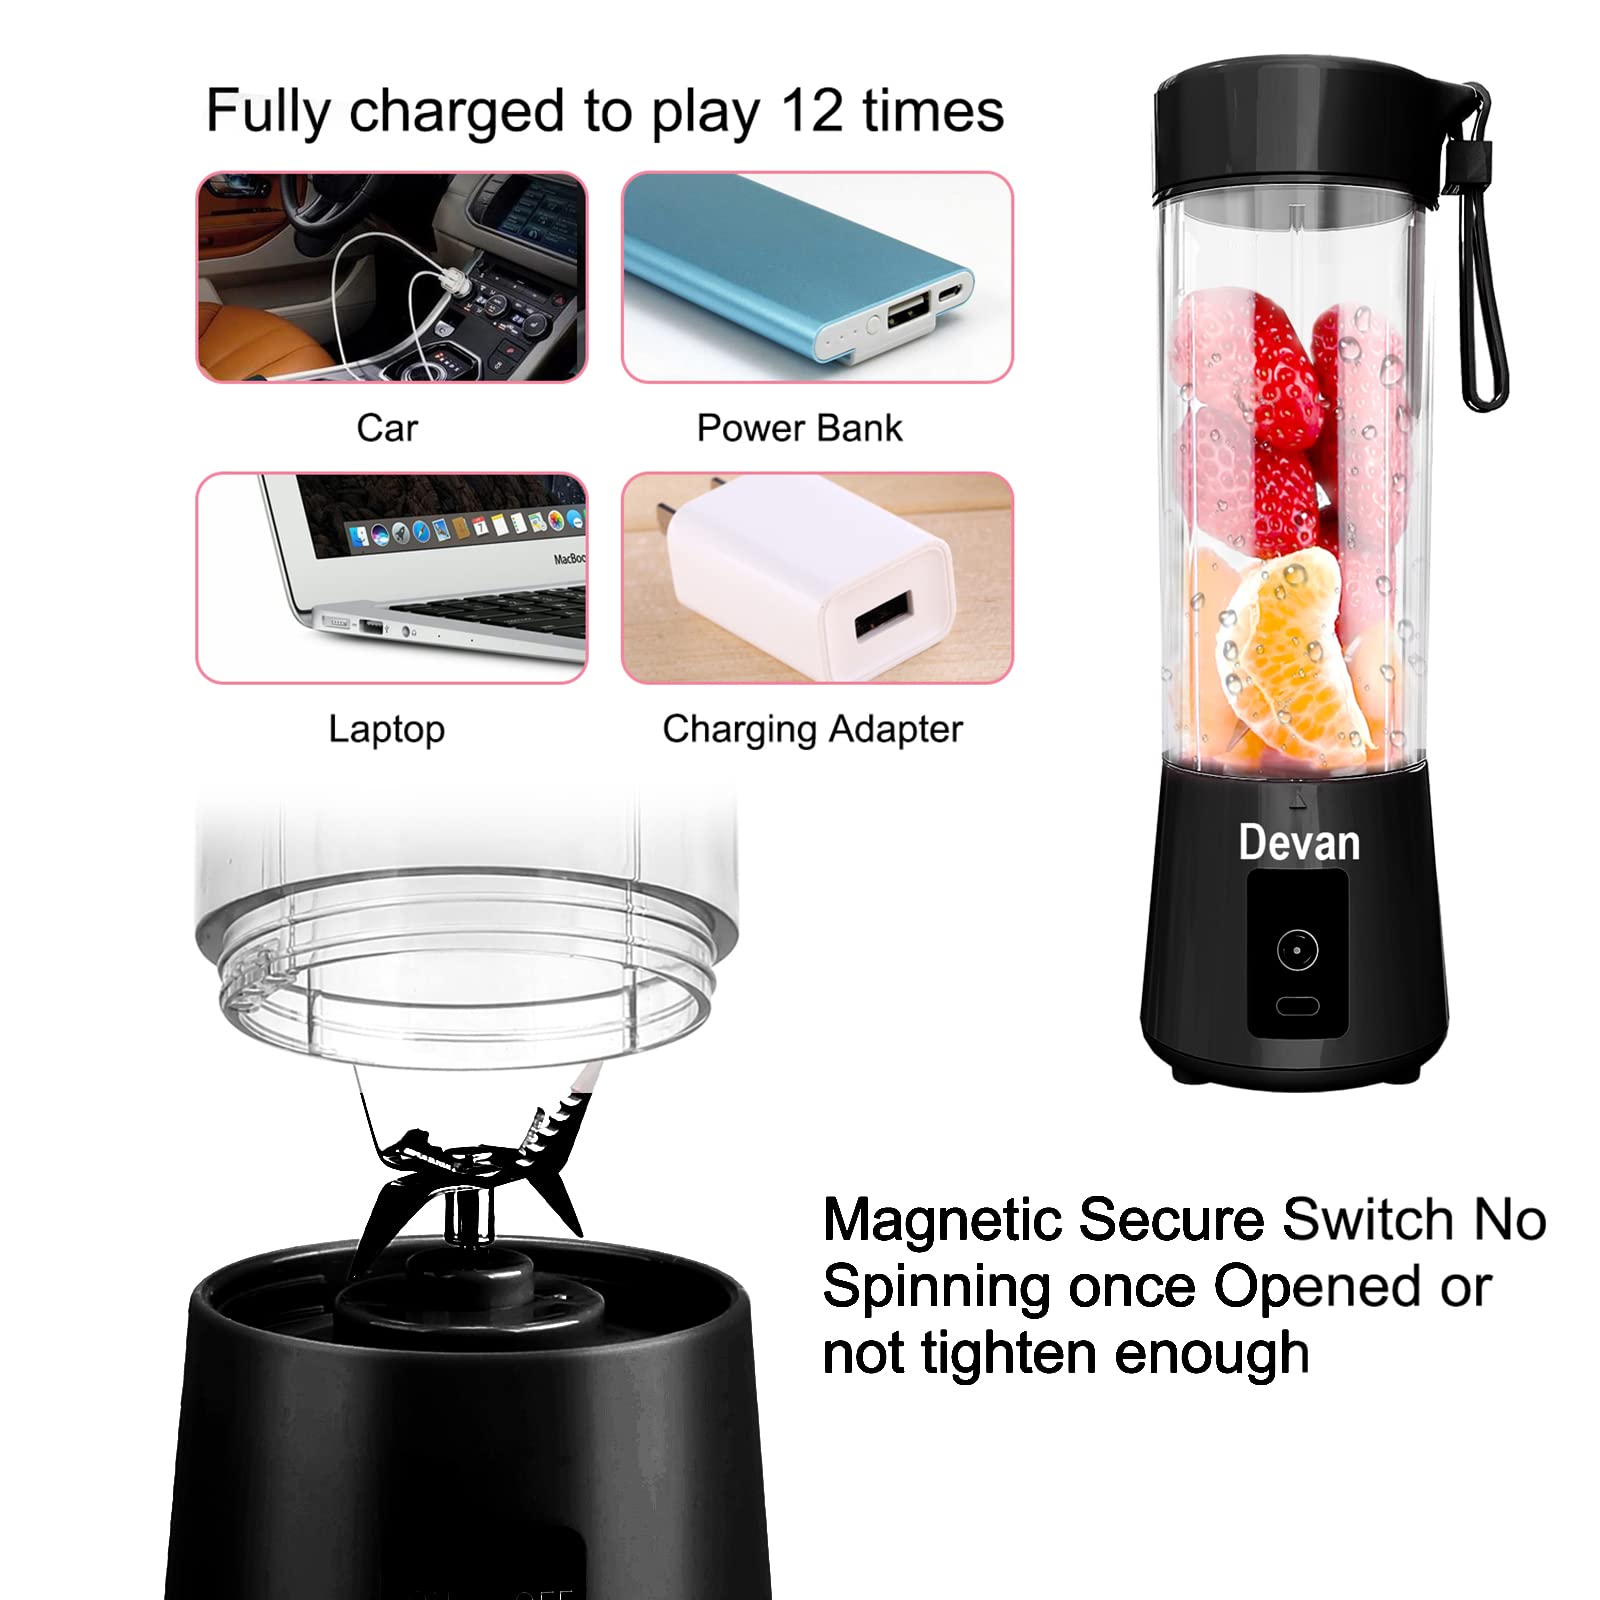 Portable Blender Smoothies Personal Blender Mini Shakes Juicer Cup USB Rechargeable 14oz. (Black)